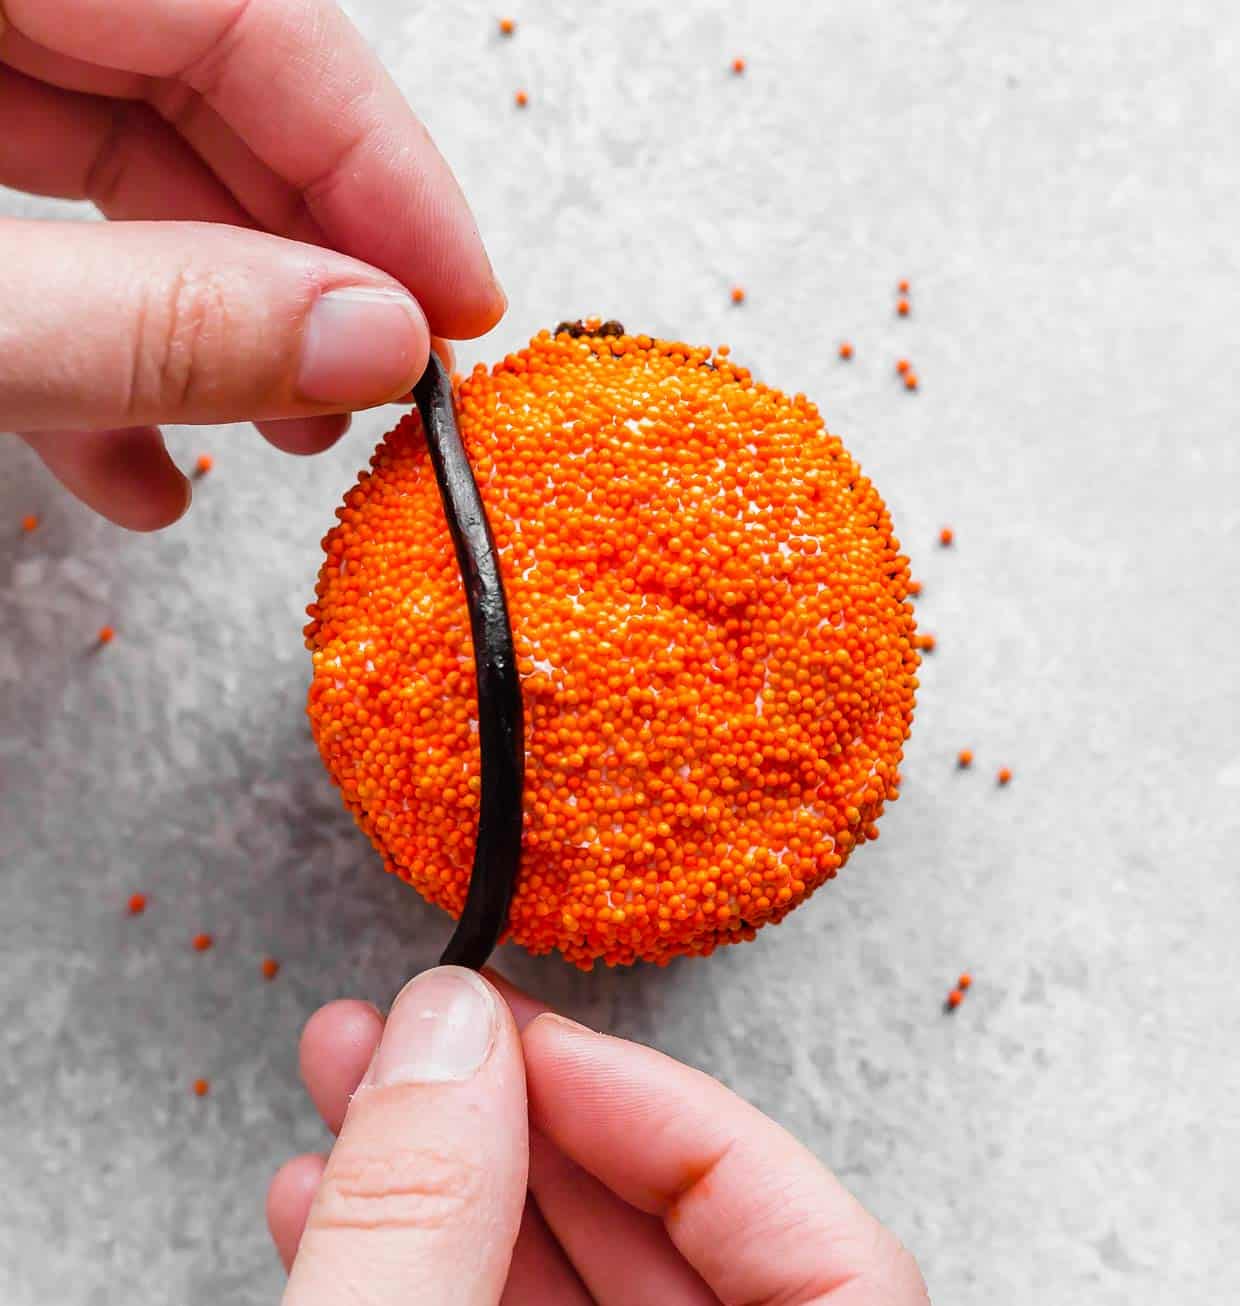 A hand placing a black licorice on a orange sprinkled cupcake.